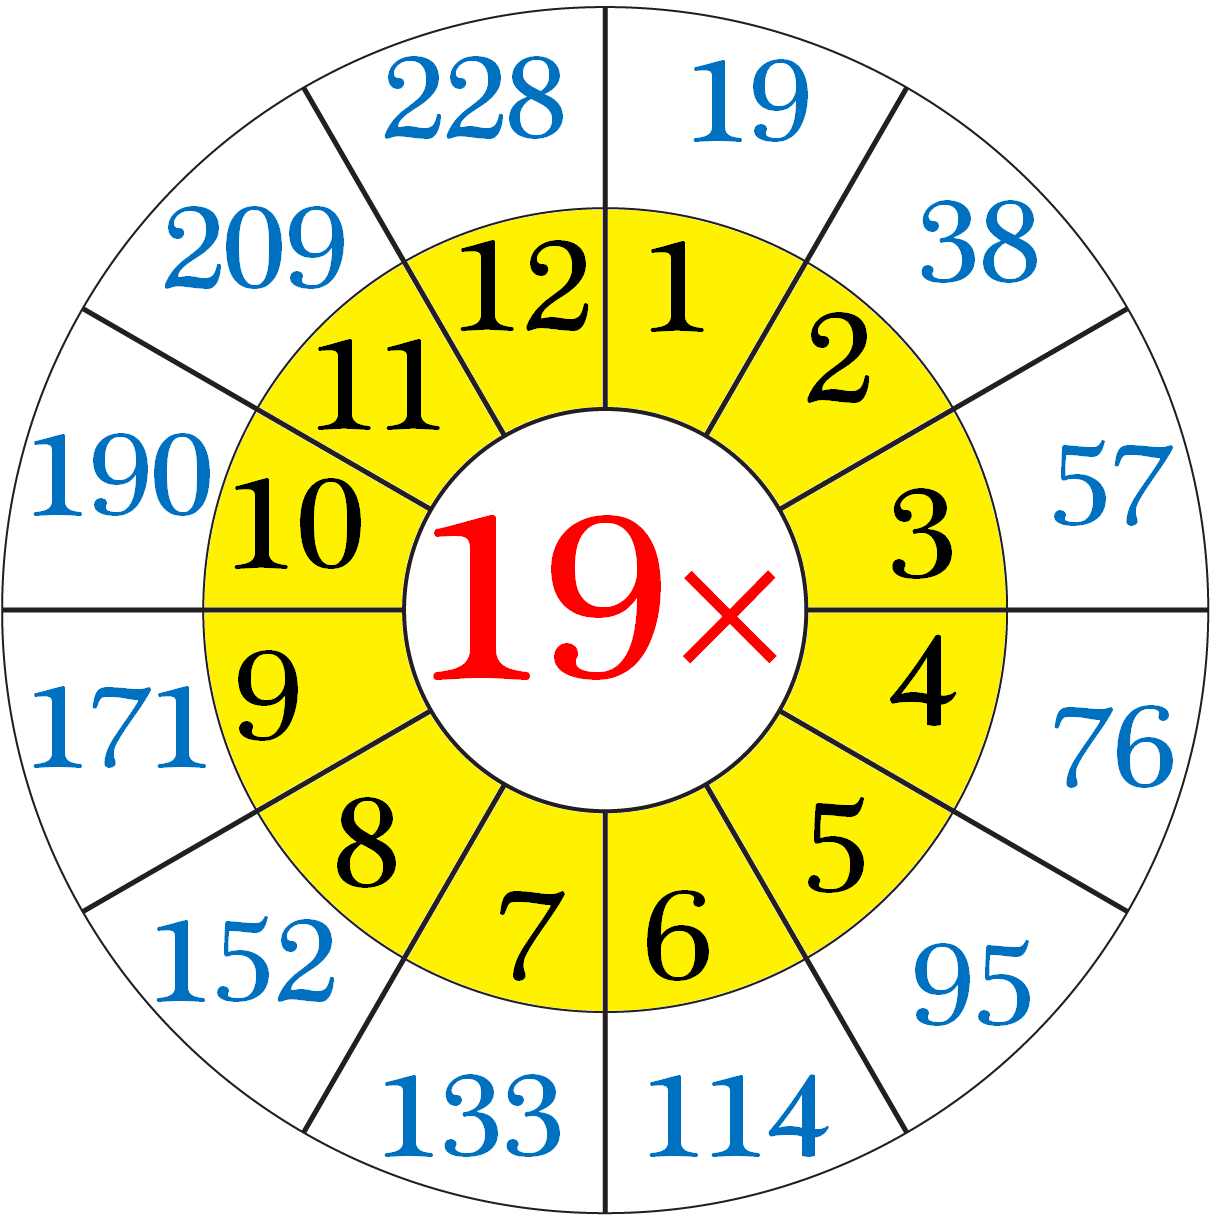 multiplication-table-of-19-read-and-write-the-table-of-19-19-times-table